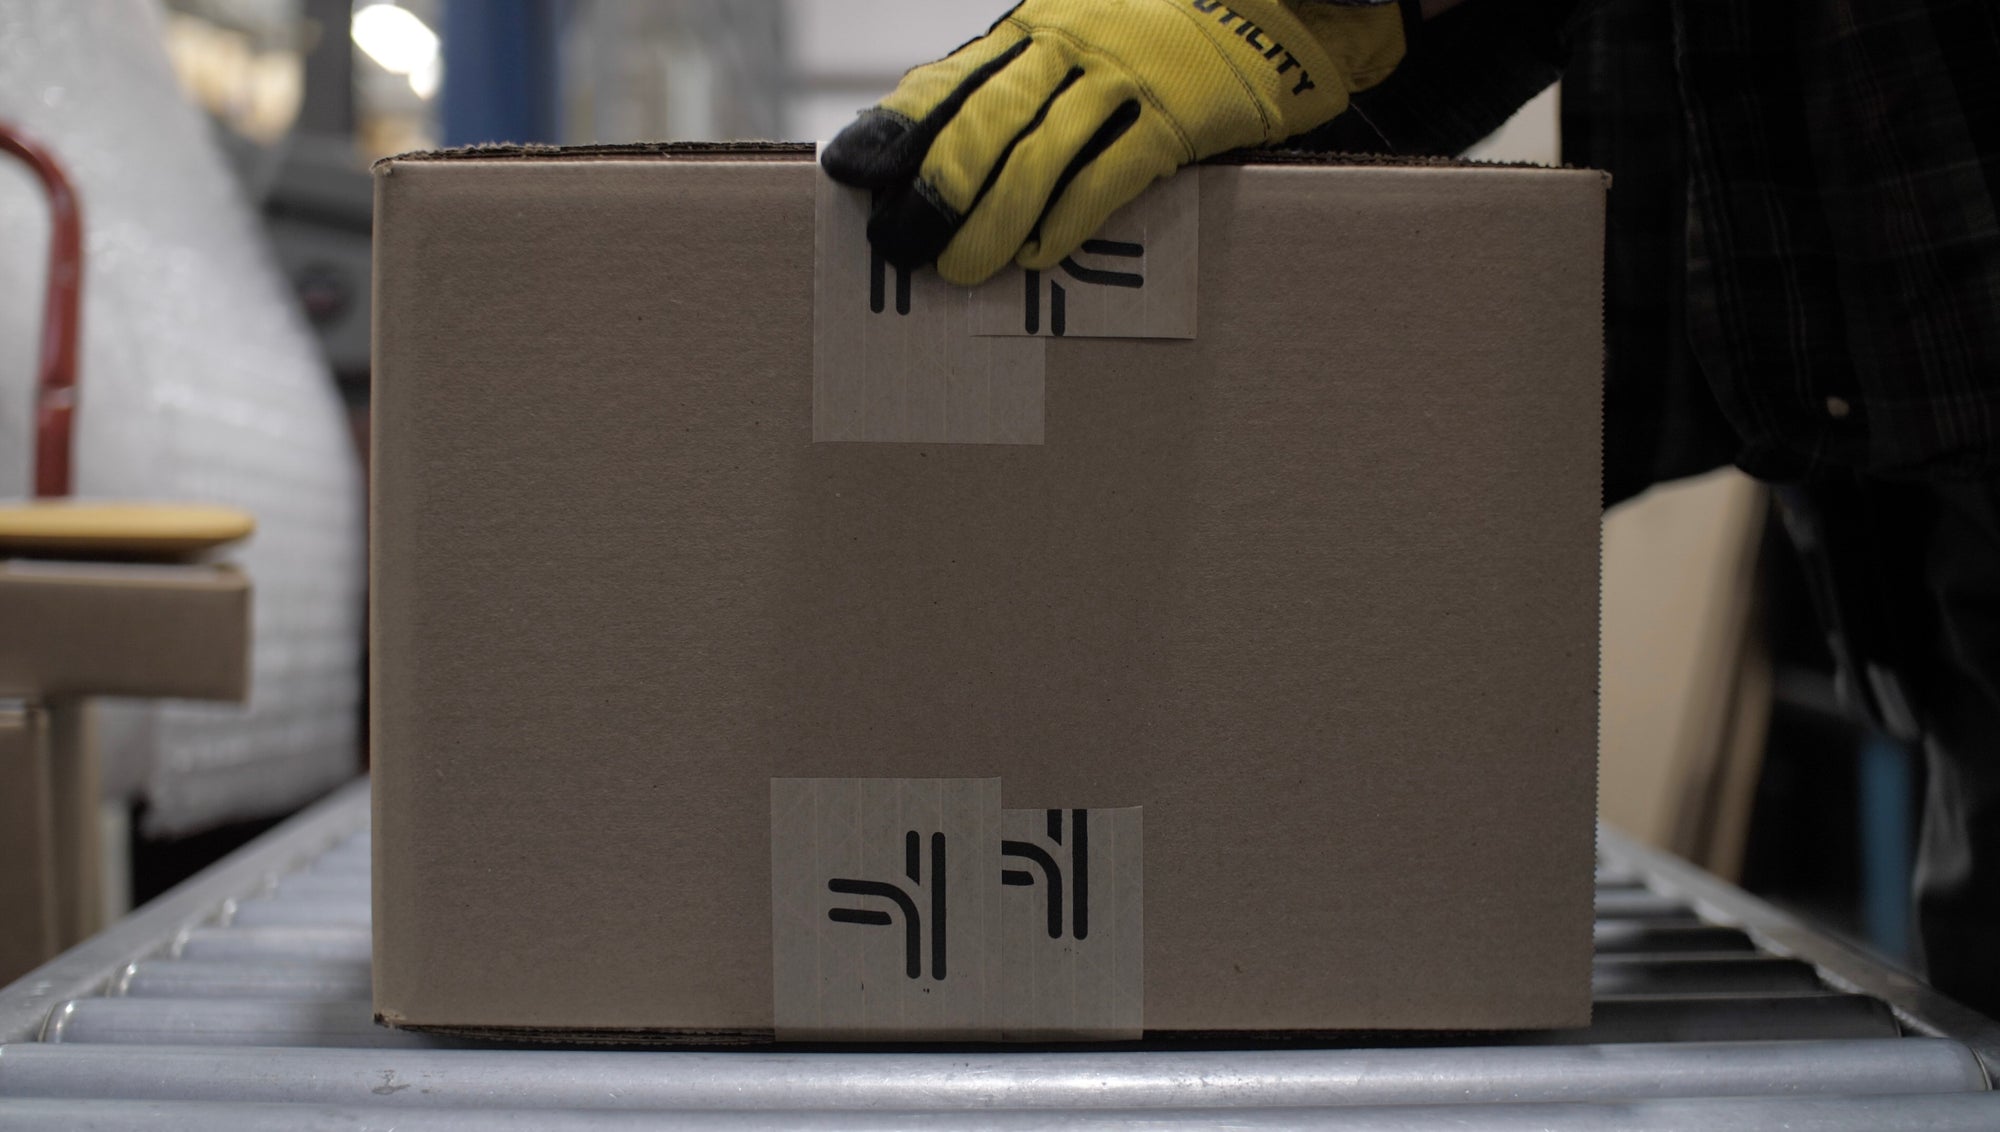 A person holding a box on a conveyor belt.